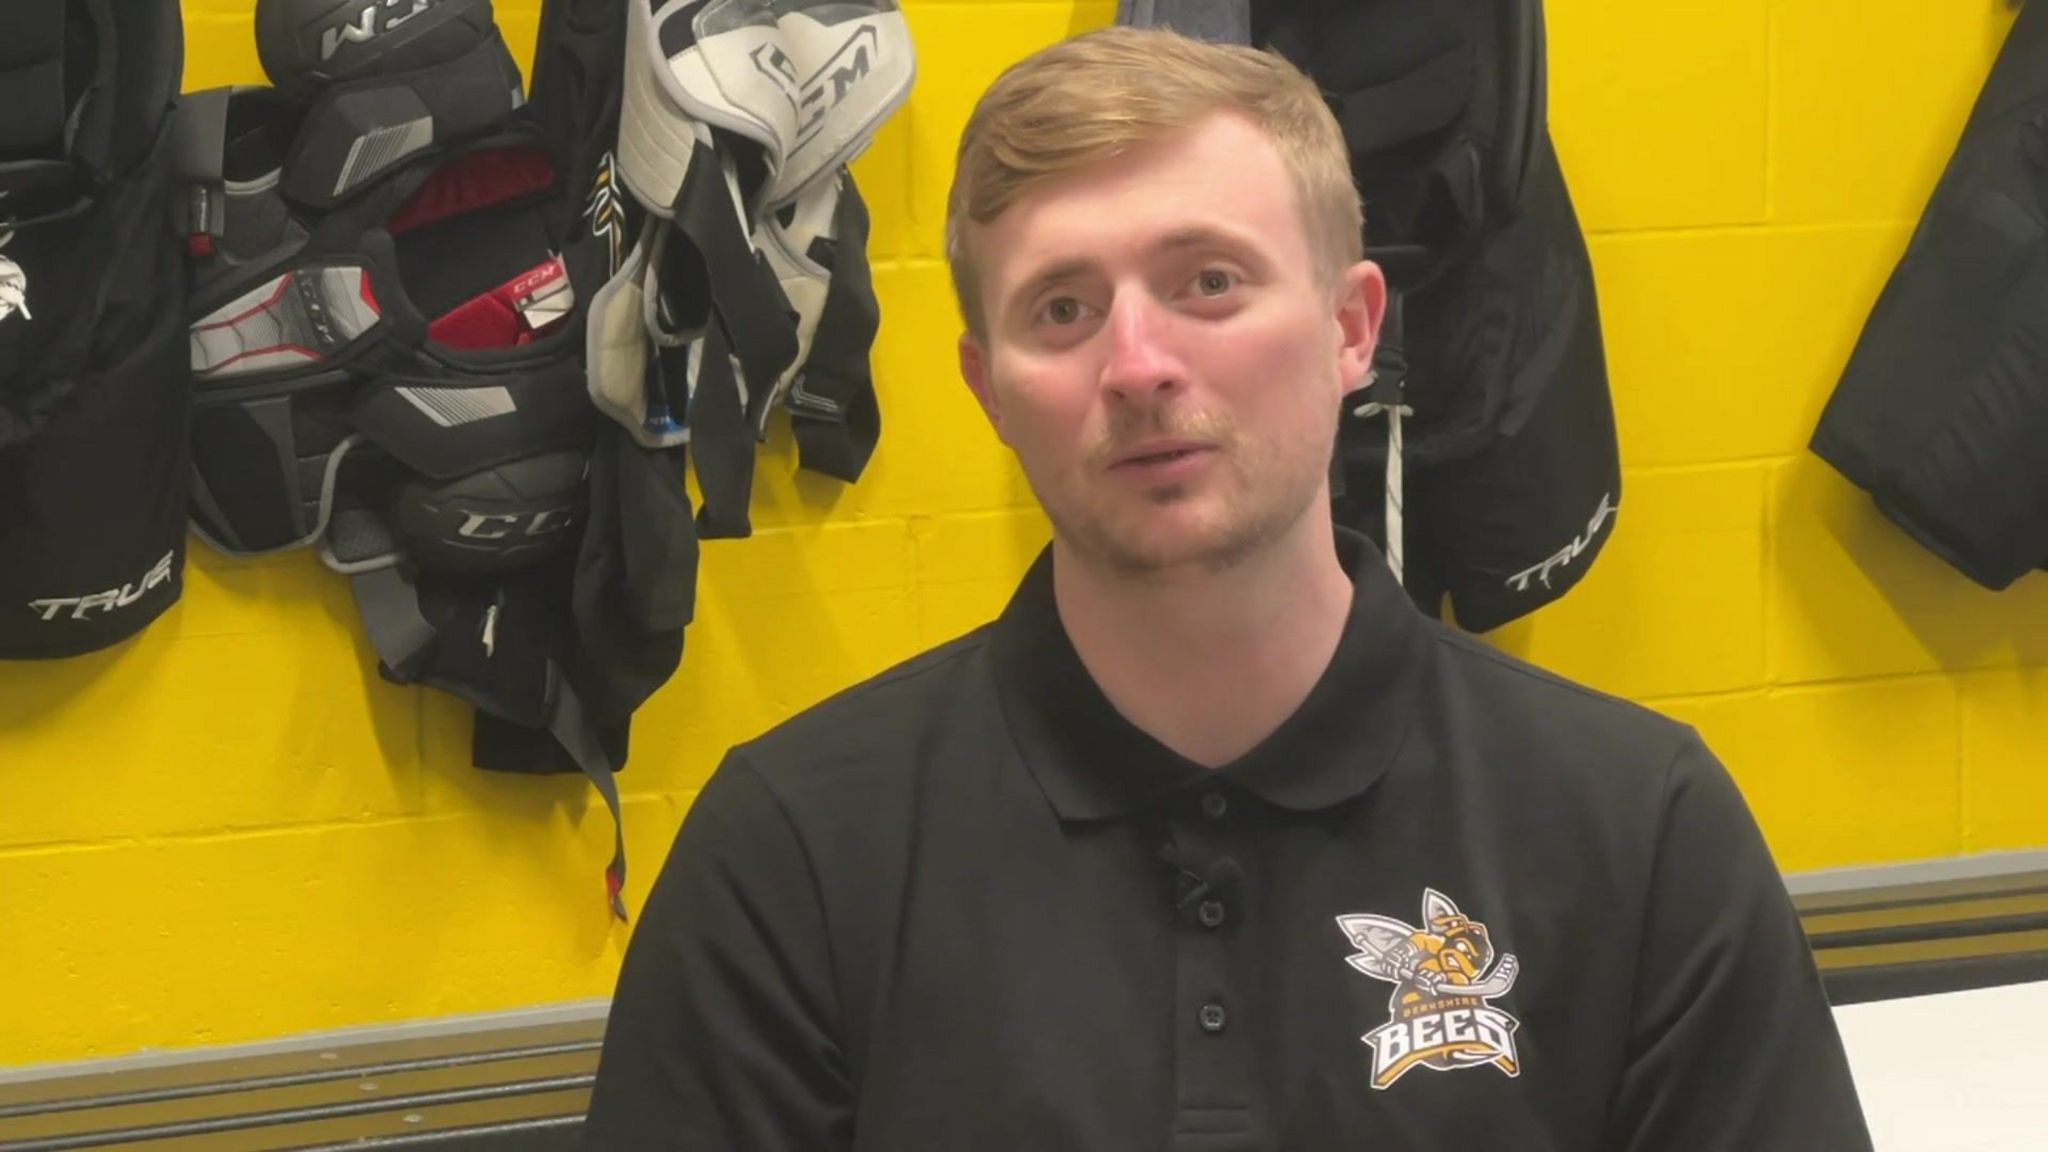 Stuart Mogg, a Berkshire Bees player, has short blonde/ginger hair and is wearing a black, buttoned T-shirt with the Berkshire Bees logo